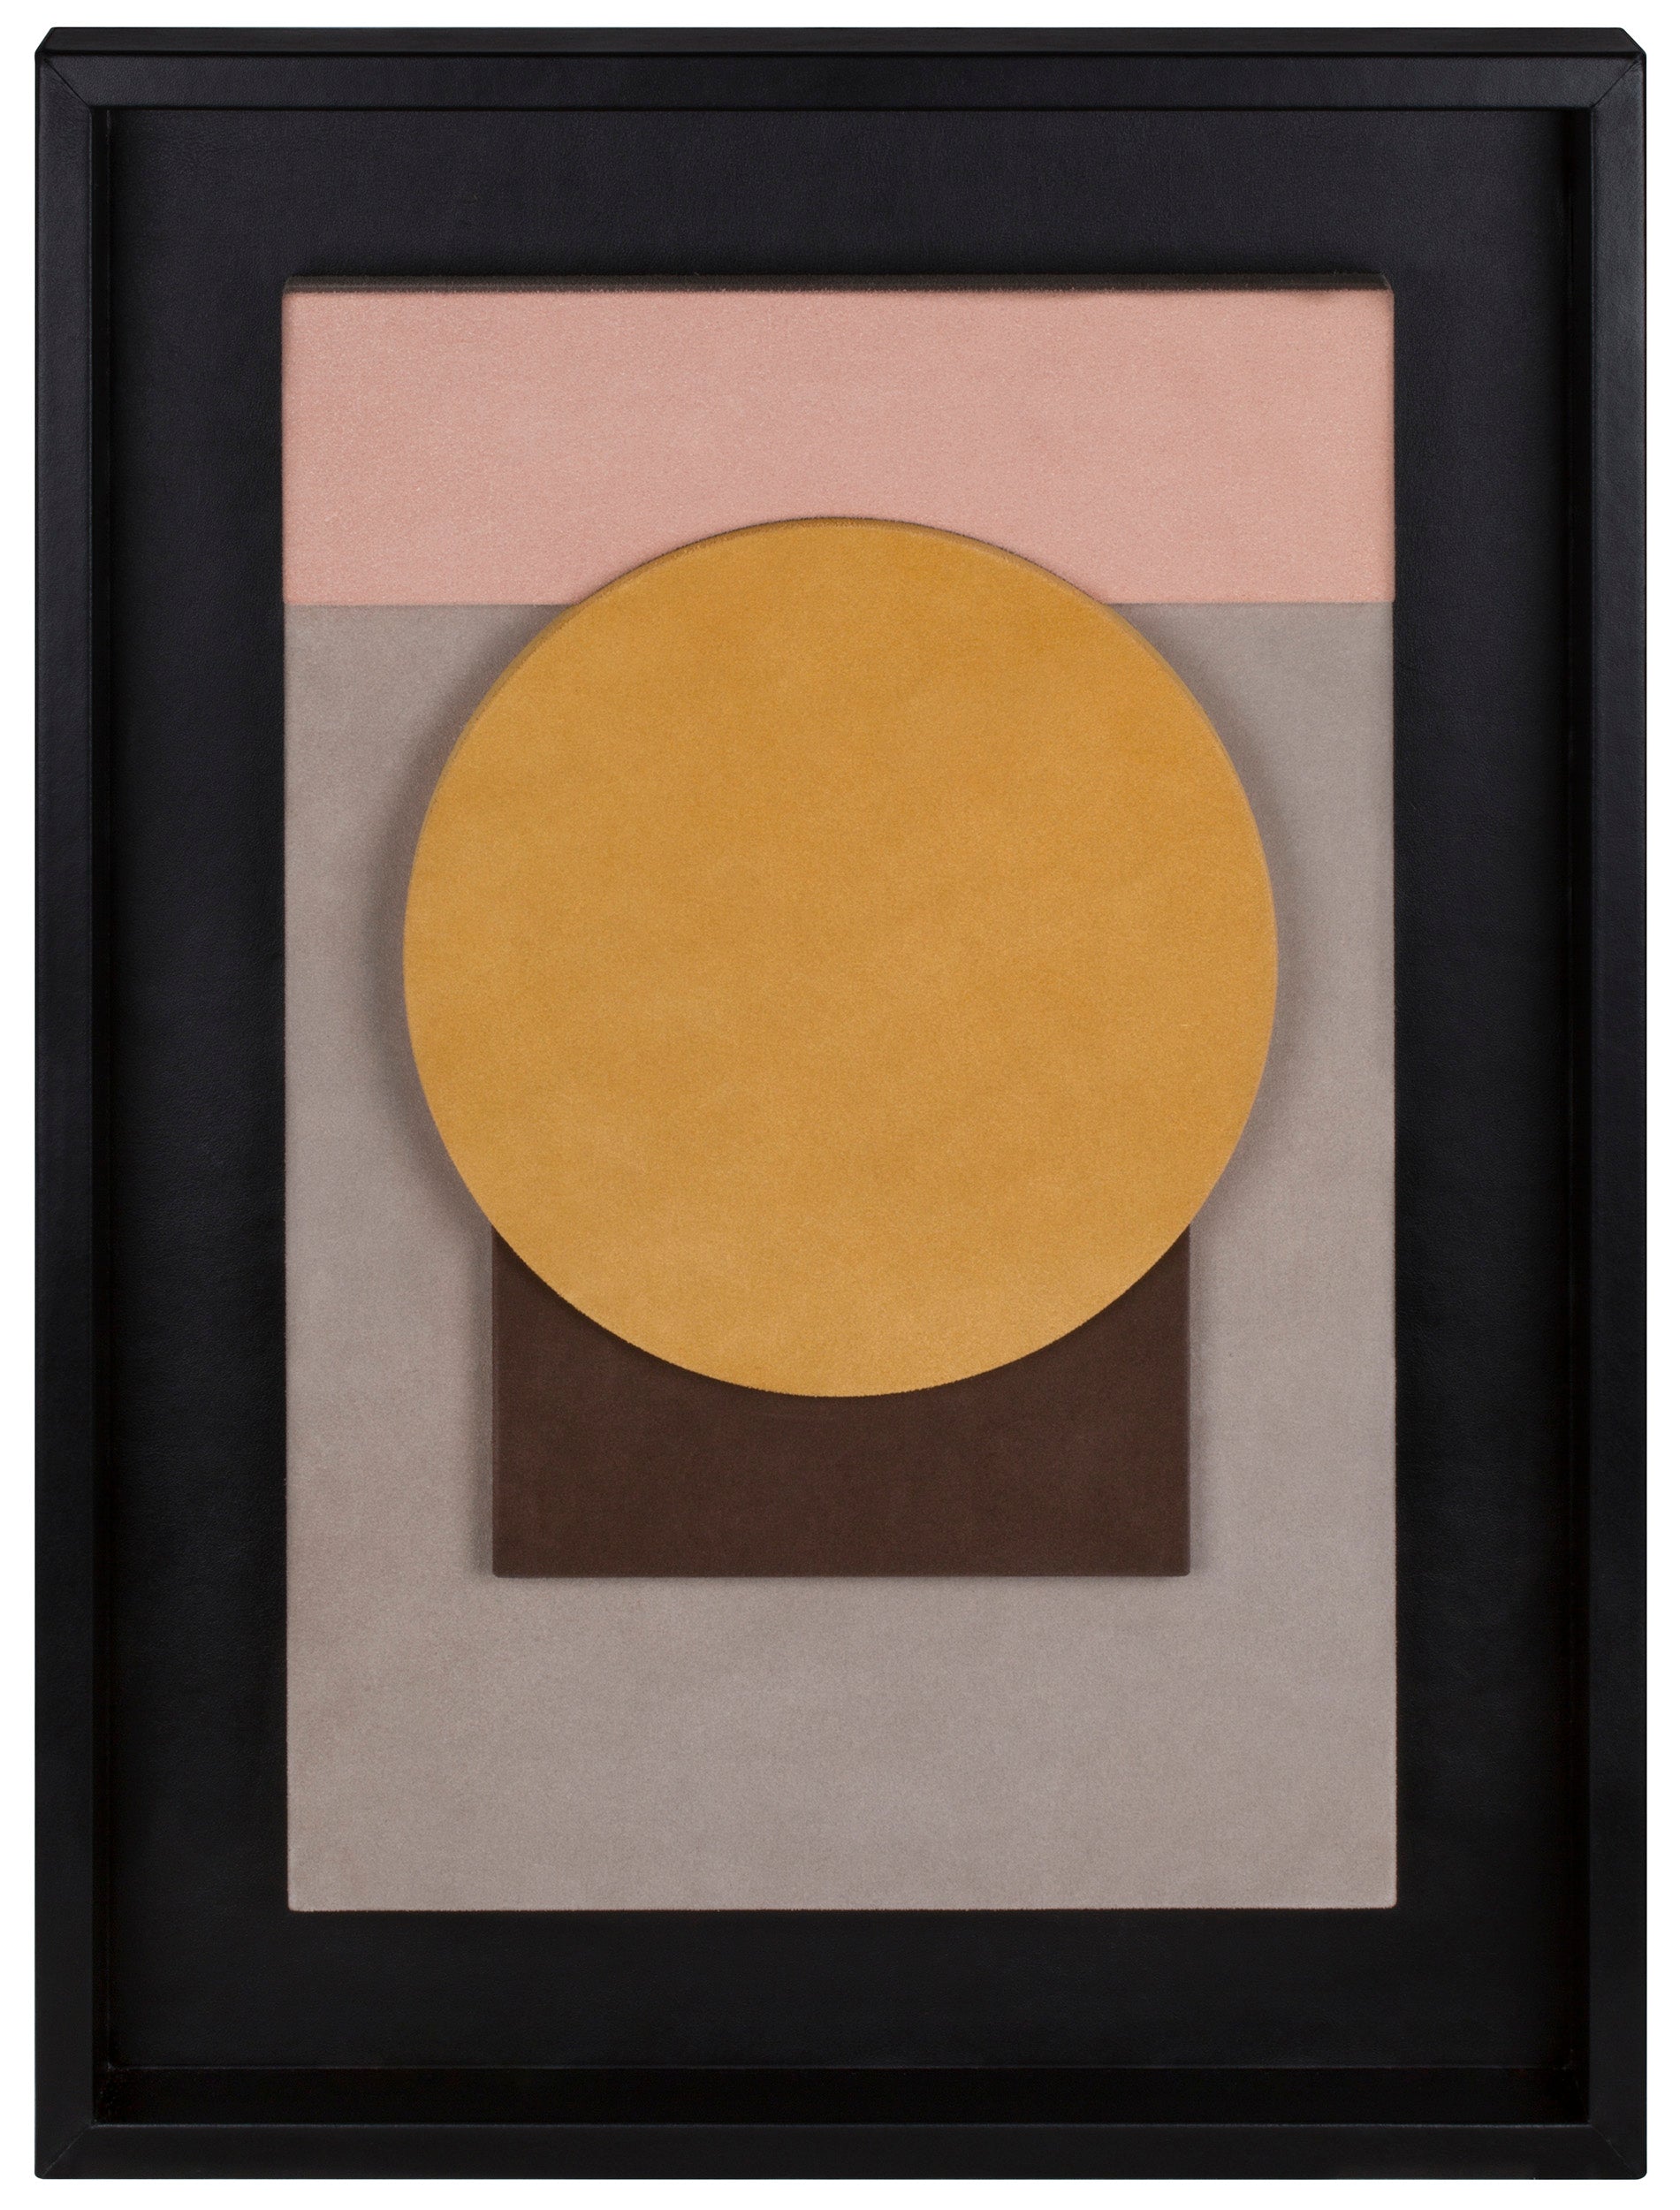 Giobagnara x Stéphane Parmentier: Tabou Cornice Suede-Covered Wood Wall Sculpture in Nappa Leather Frame | Contemporary Wall Art, Stylish Sculpture & Home Decor | 2Jour Concierge, #1 luxury high-end gift & lifestyle shop